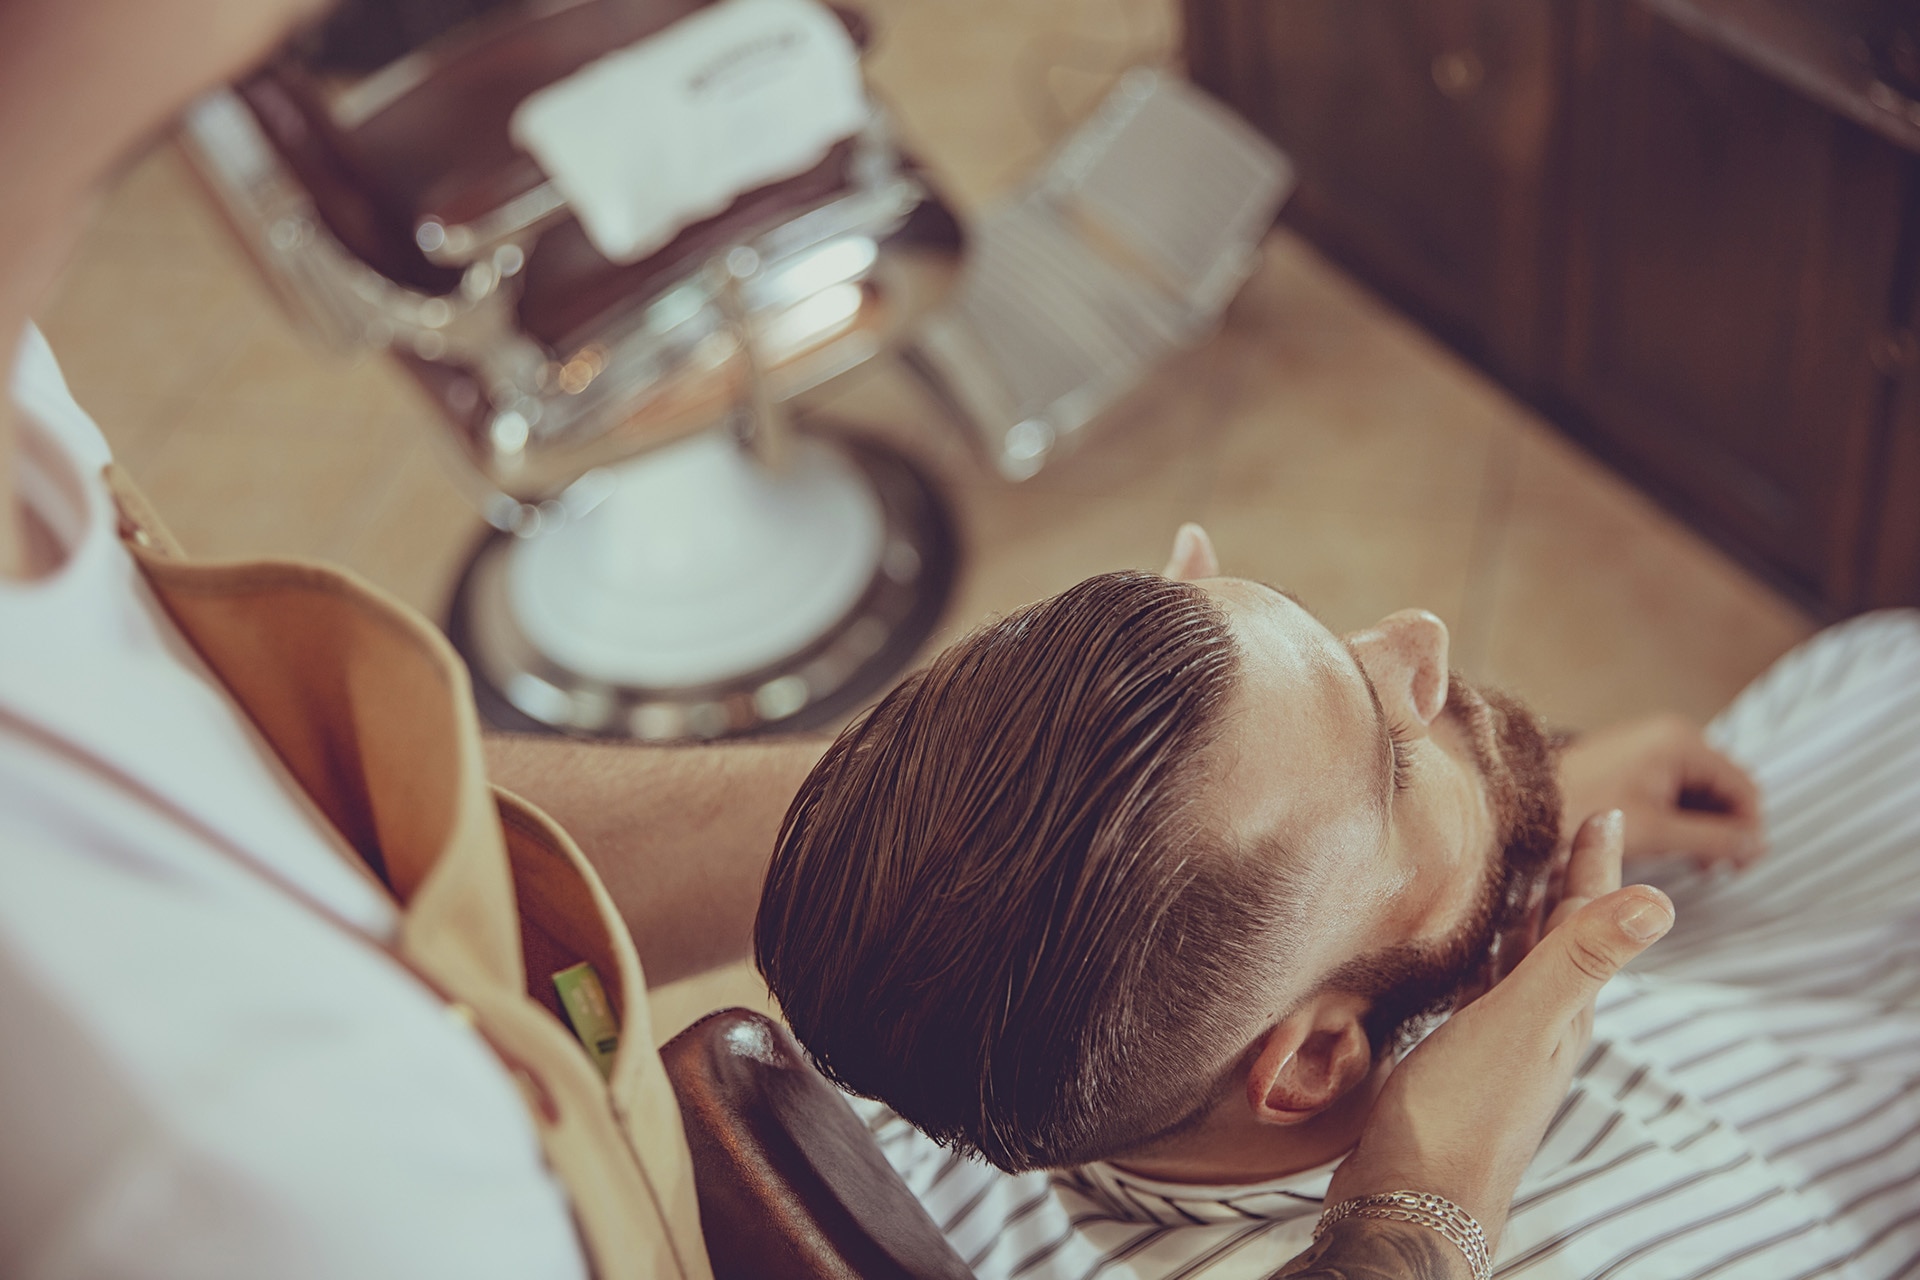 The Best Hair Stylists In Adelaide - GQ Australia